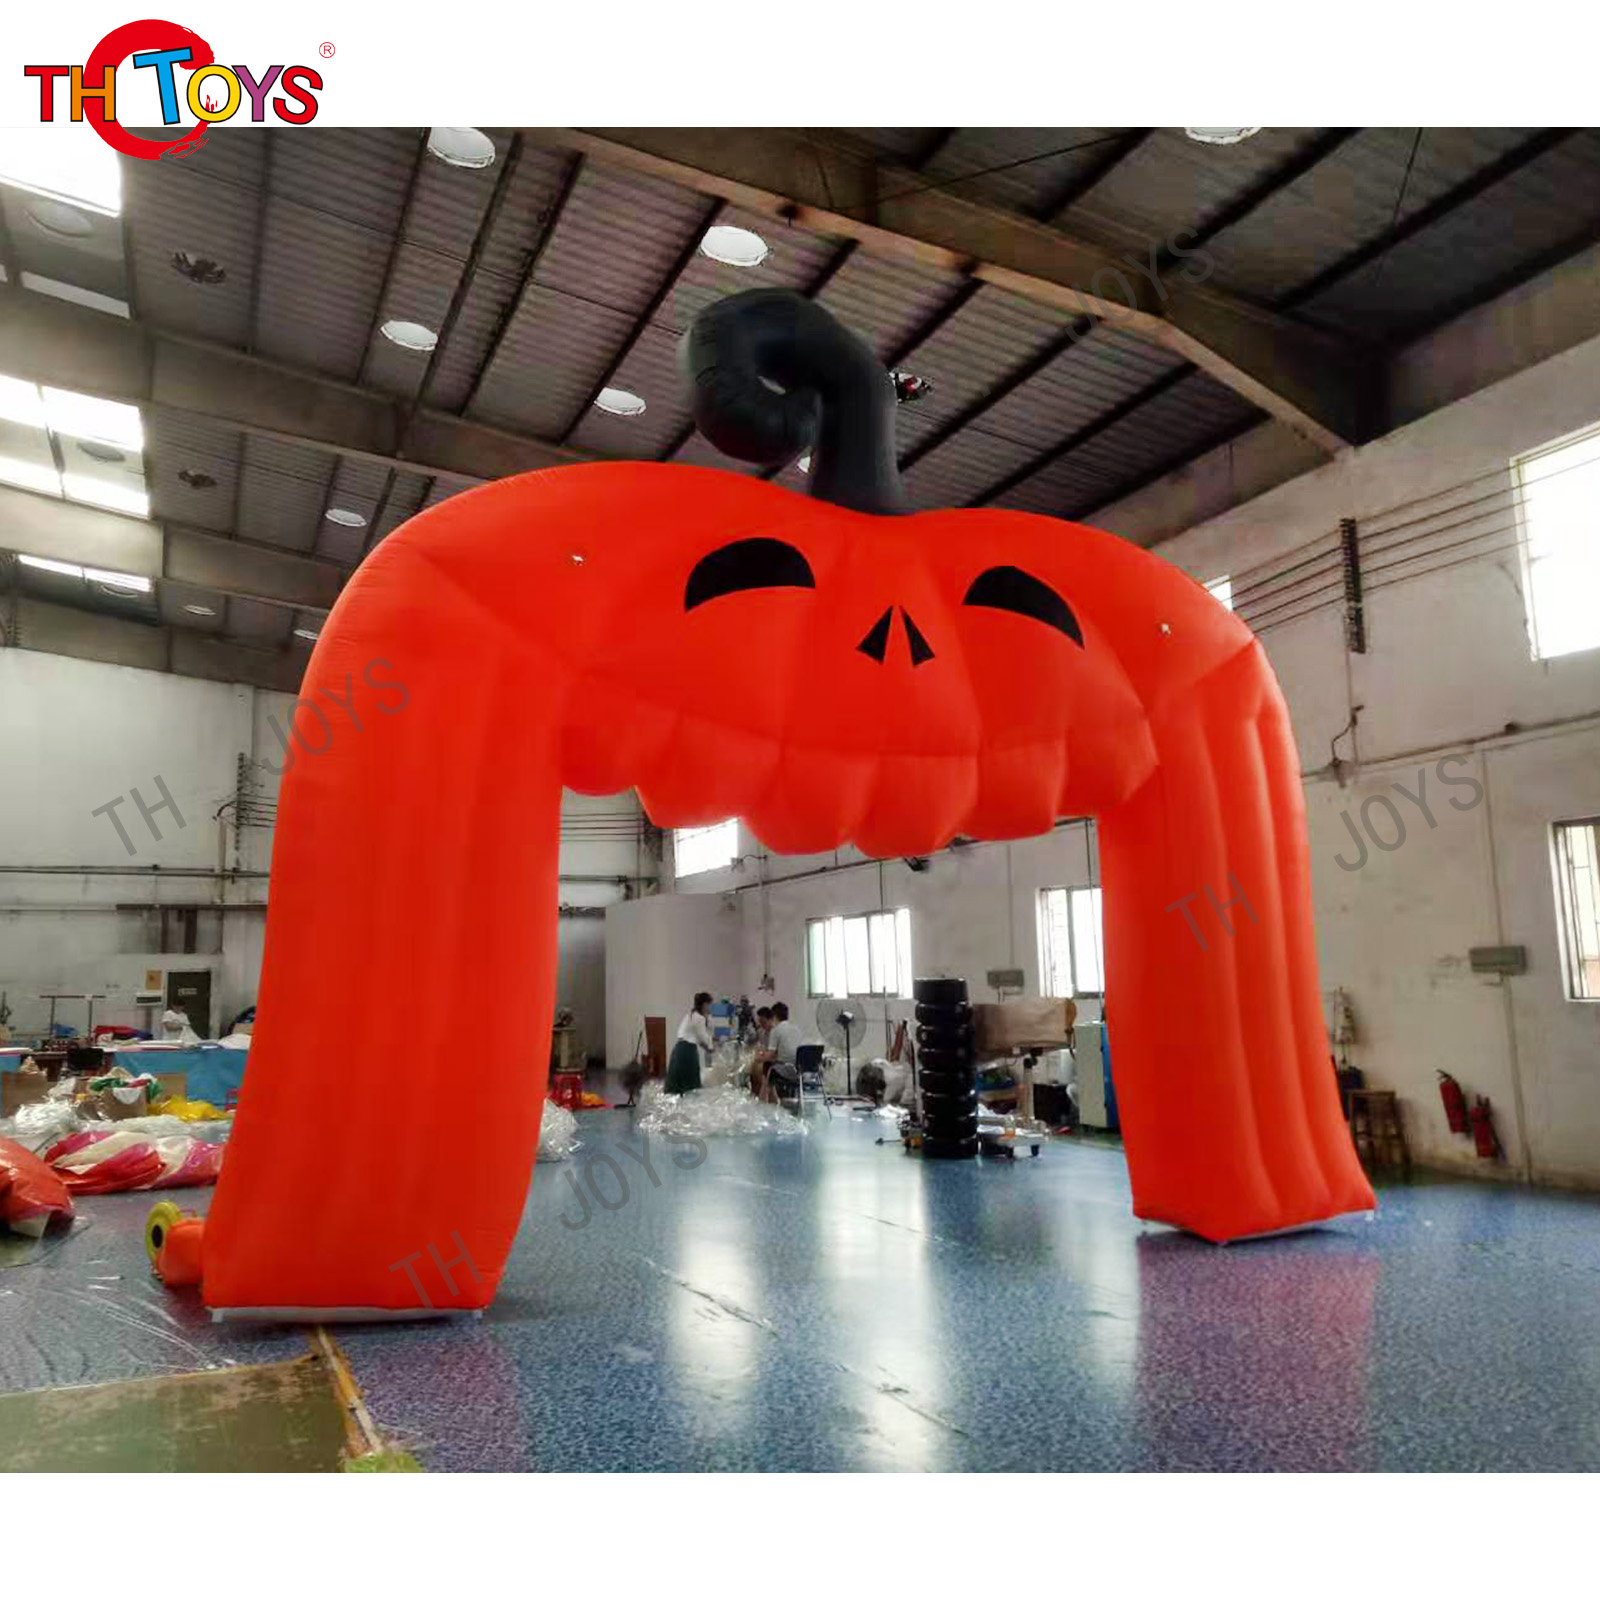 Advertising Halloween Event Outdoor Decoration Inflatable Arch with Witch and Pumpkin for Haunted House